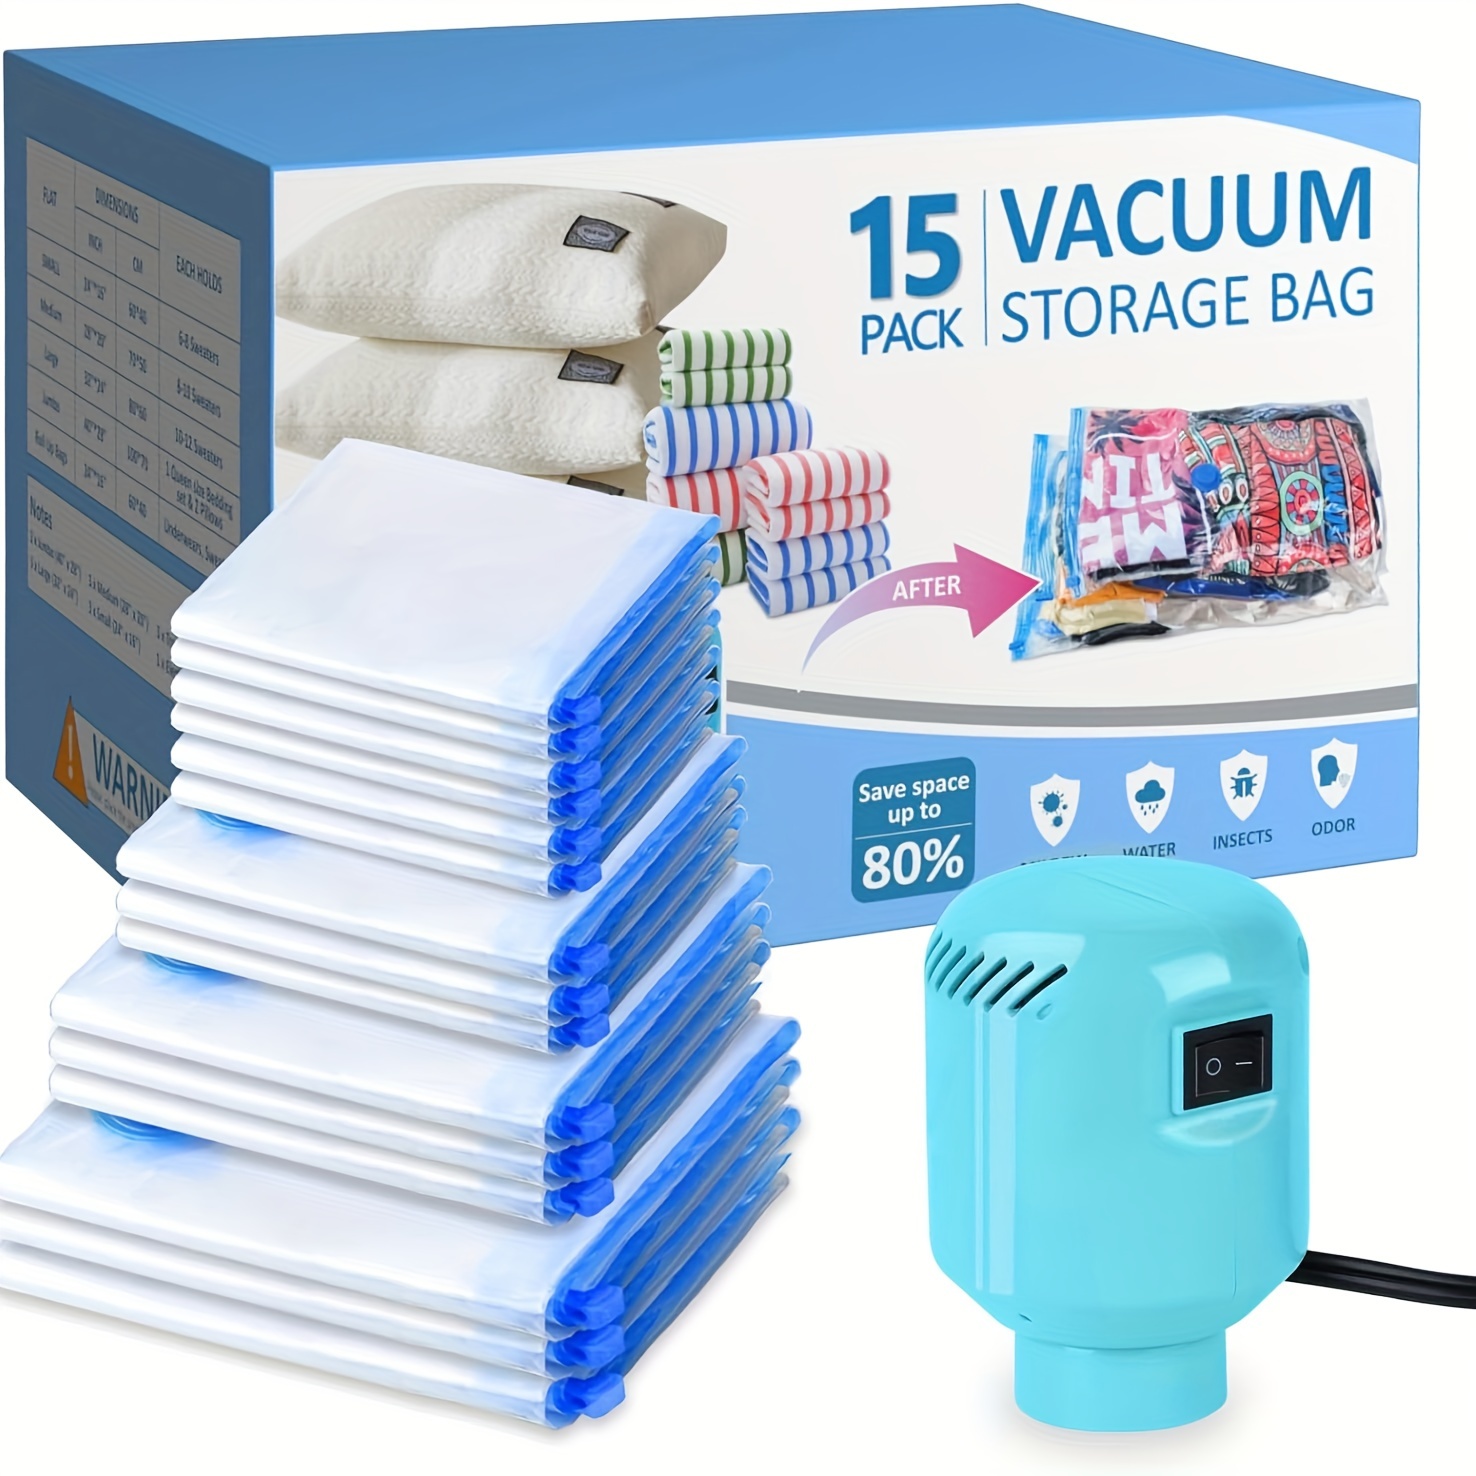 

Vacuum Storage Bags With Electric Air Pump, (jumbo/ Large/ Medium/ Small/ Roll) Space Saver Storage Vacuum Sealed Bags For Clothing, Bedding, Comforters, Blankets, Travel